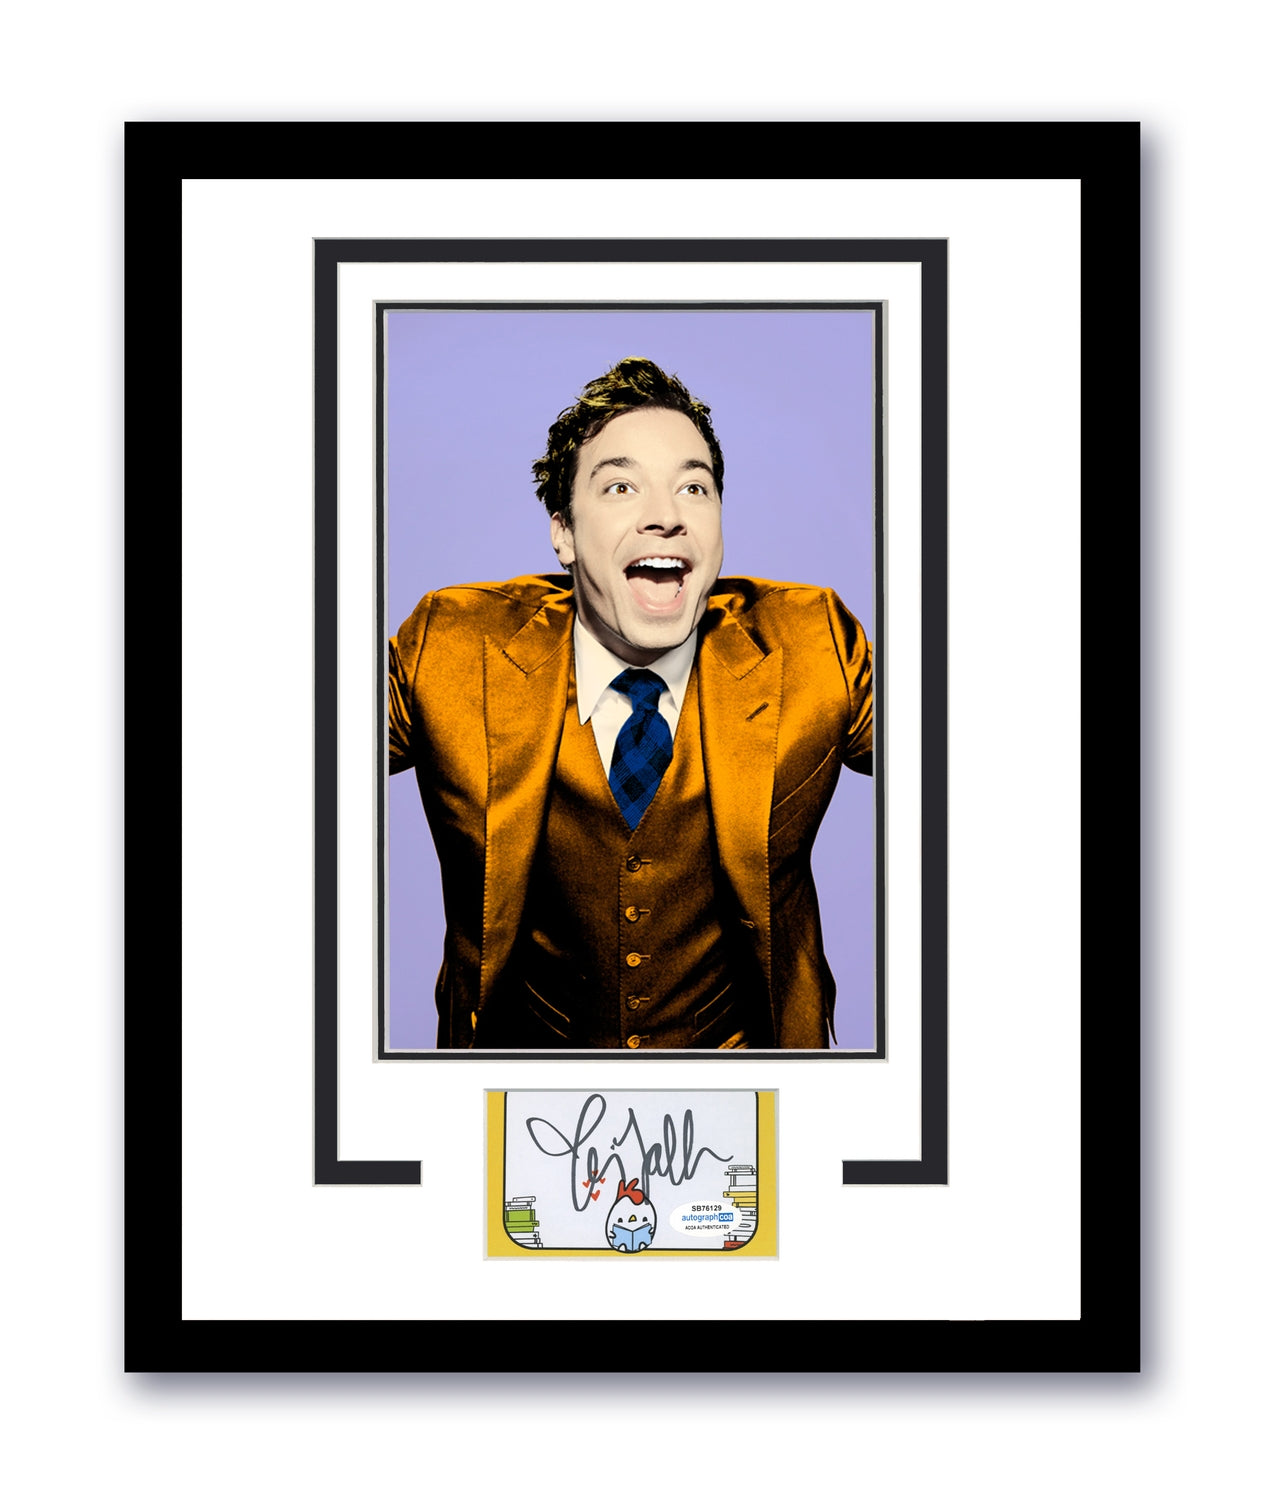 Jimmy Fallon Signed Cut 11x14 The Tonight Show Autographed Authentic ACOA 6